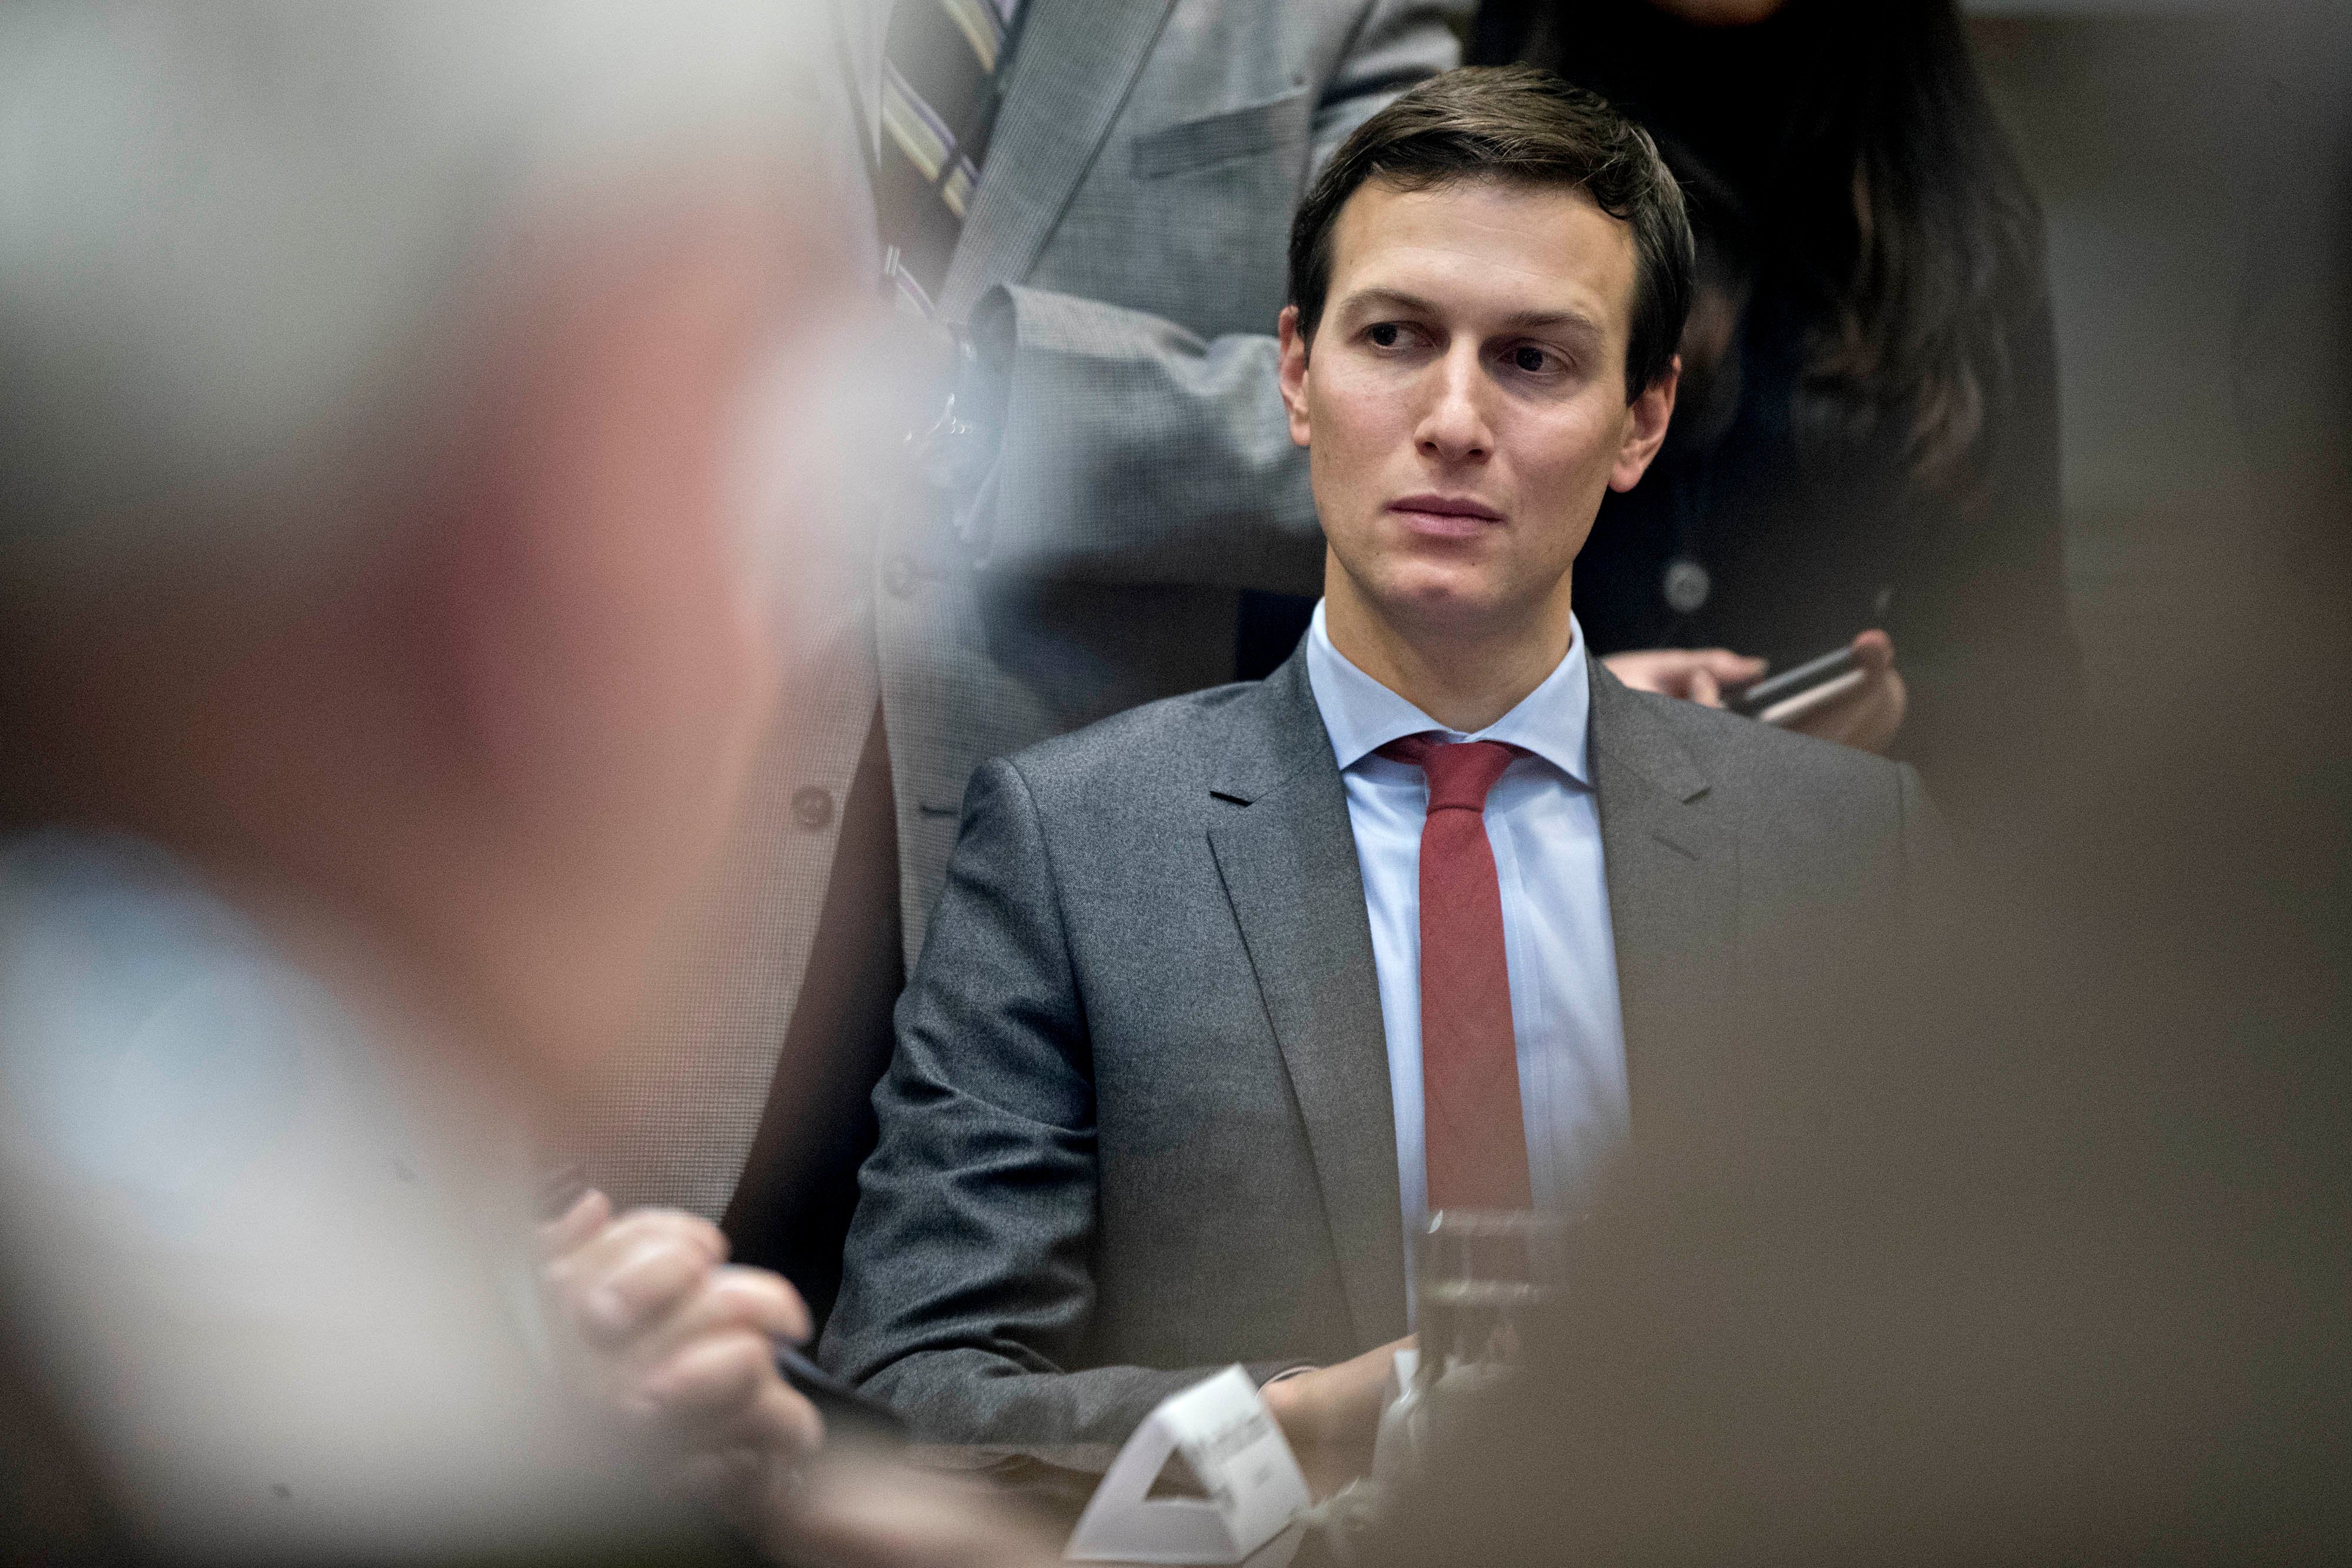 White House Refuses to Address Reports That Jared Kushner Wanted Secret Line With Russia